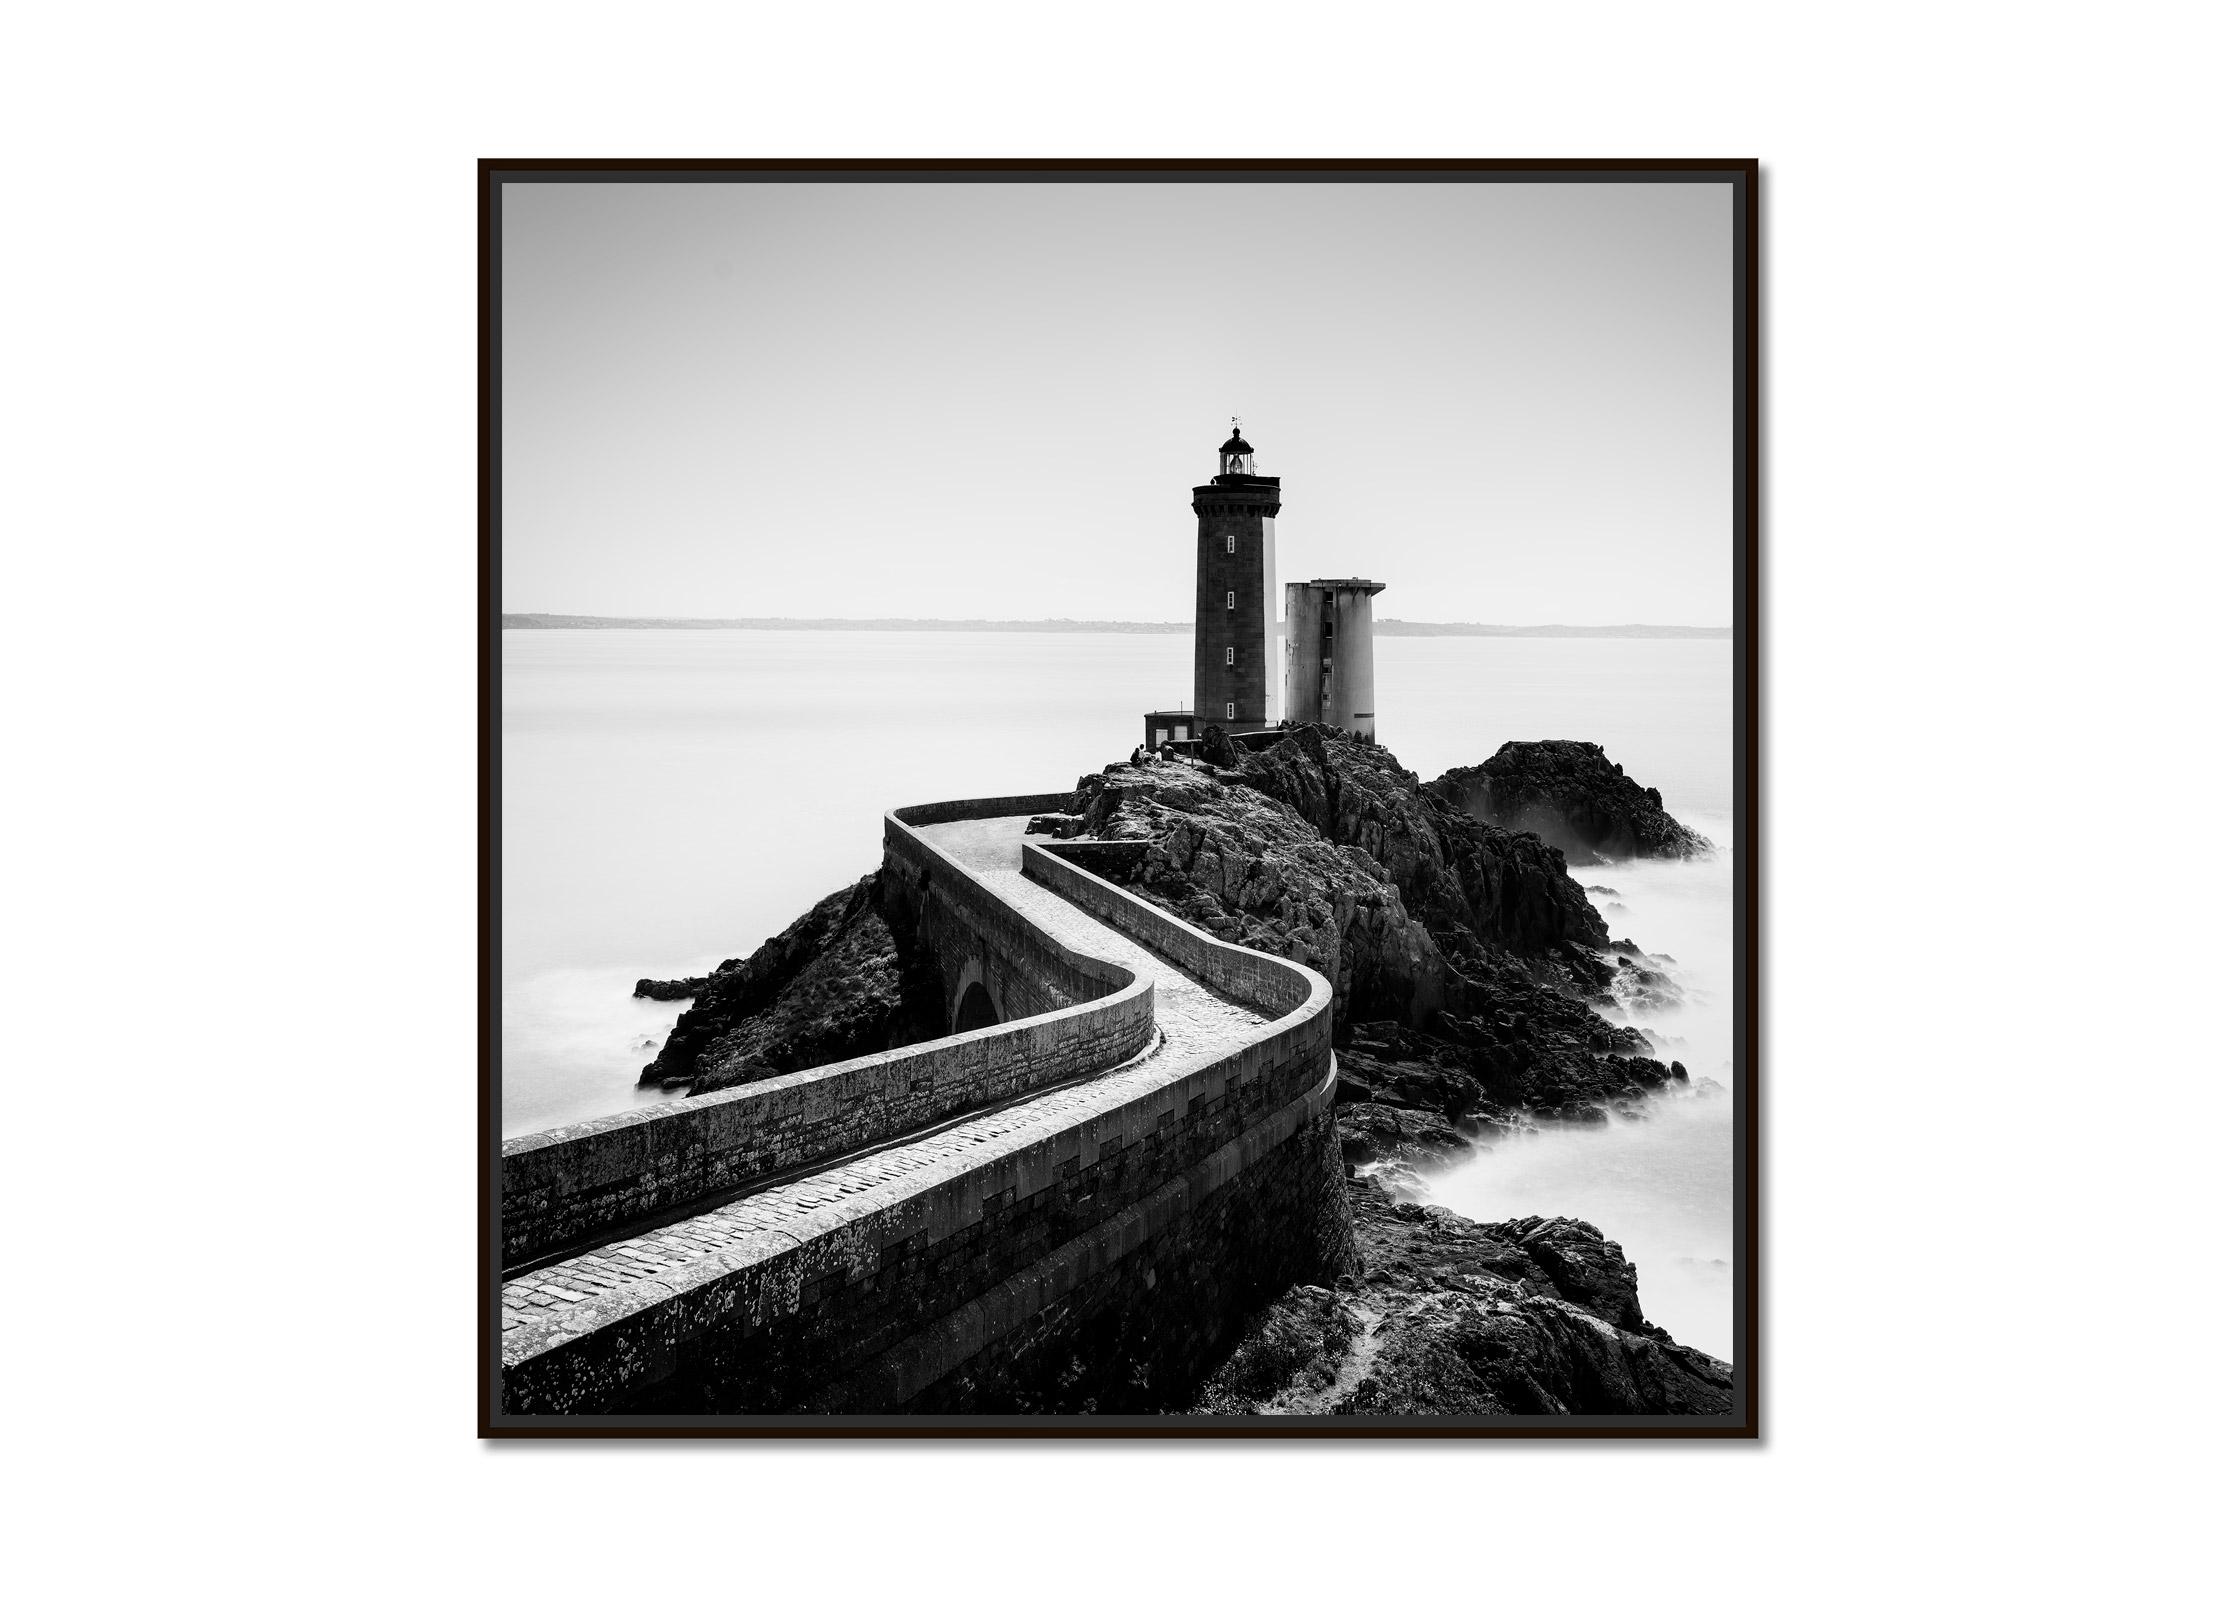 Petit Minou Lighthouse, Brittany, France, black & white waterscape photography  - Photograph by Gerald Berghammer